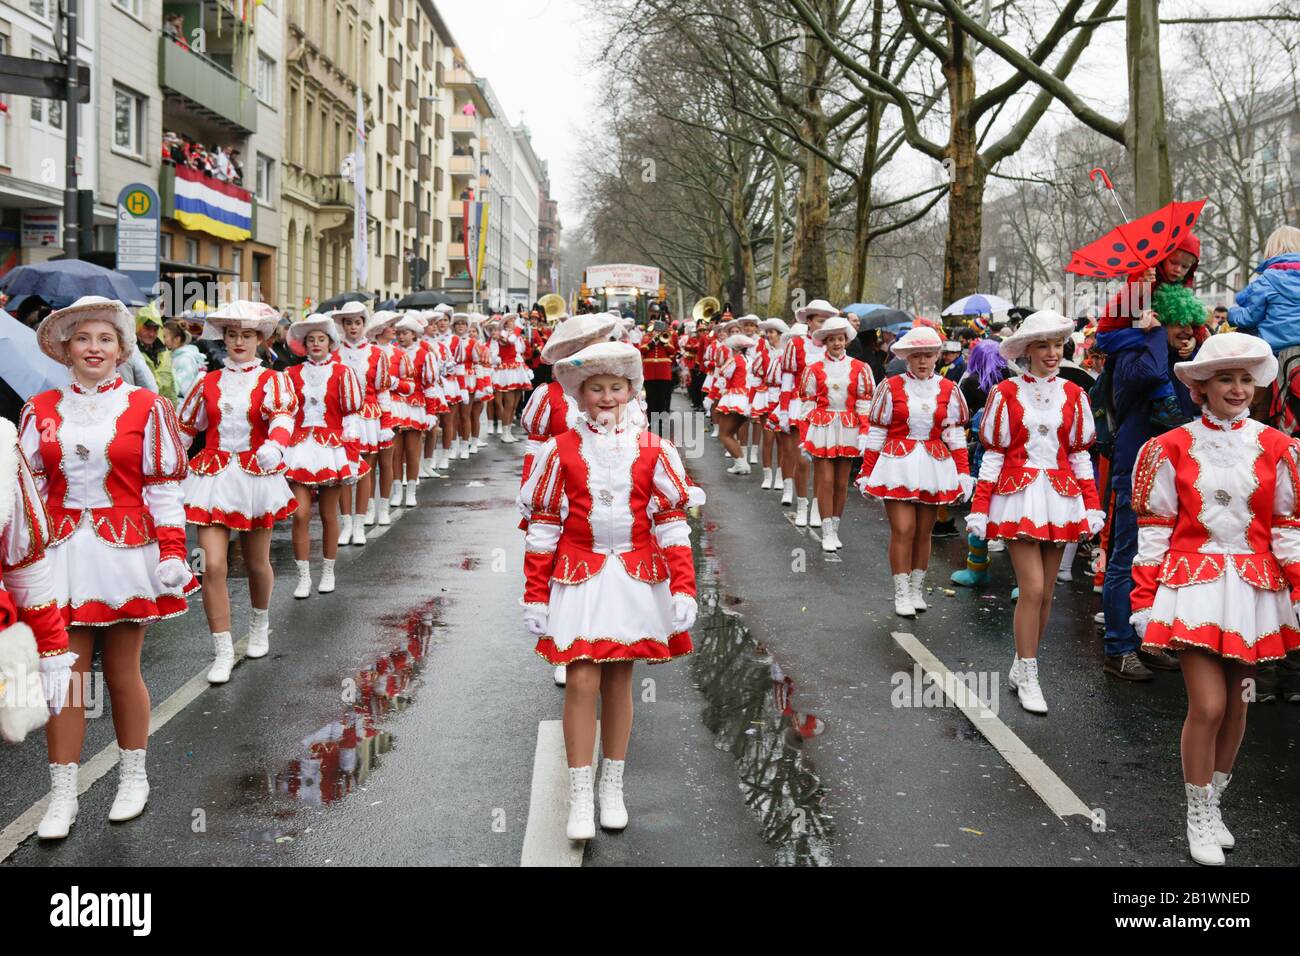 Mainz, Germany. 24th February 2020. Majorettes of the Ebersheimer Carneval-Verein Die Roemer (The Romans) march in the the Mainz Rose Monday parade. Around half a million people lined the streets of Mainz for the traditional Rose Monday Carnival Parade. The 9 km long parade with over 9,000 participants is one of the three large Rose Monday Parades in Germany. Stock Photo